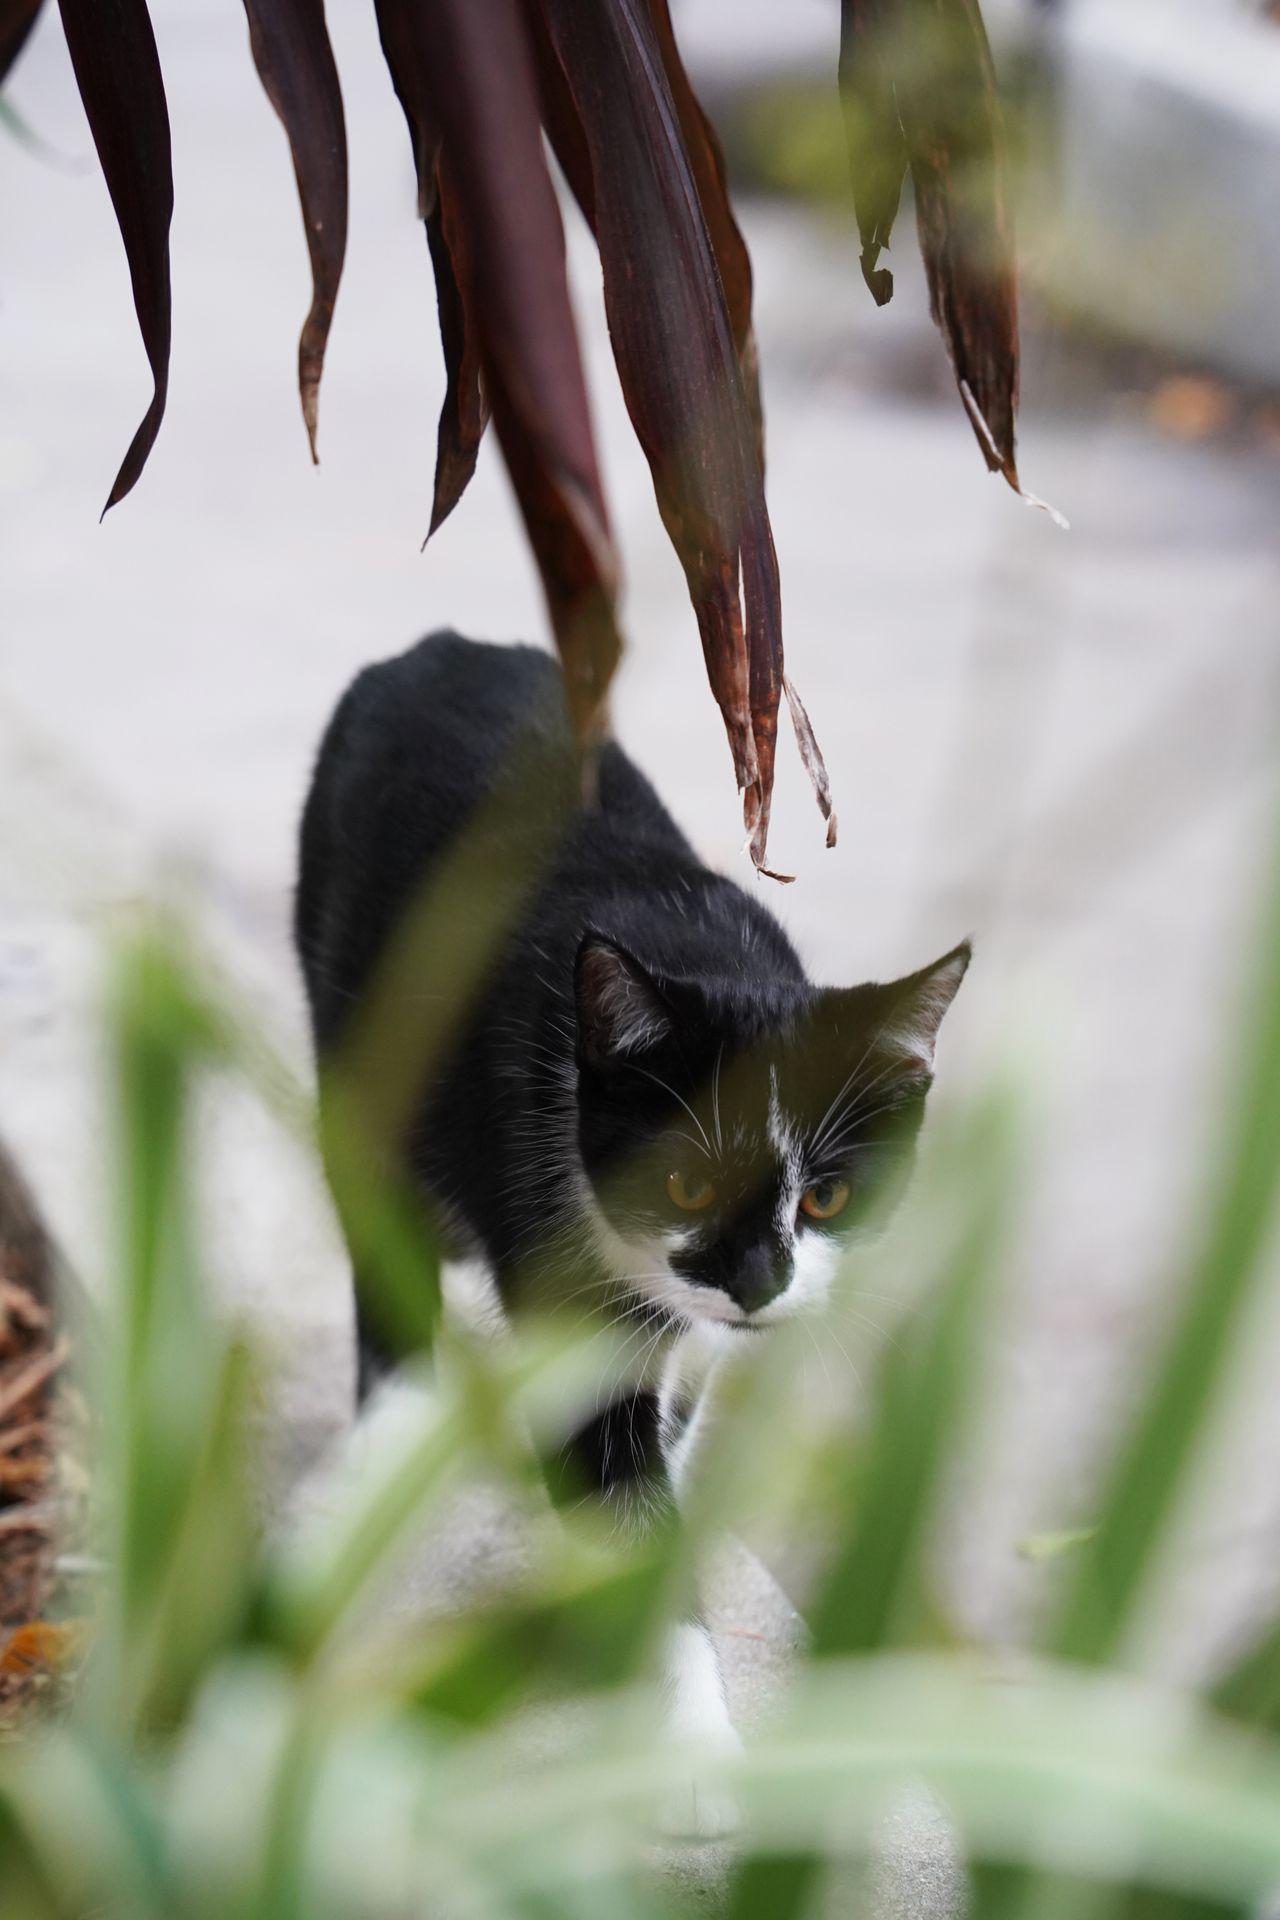 A black and white cat with blurred grass in the foreground